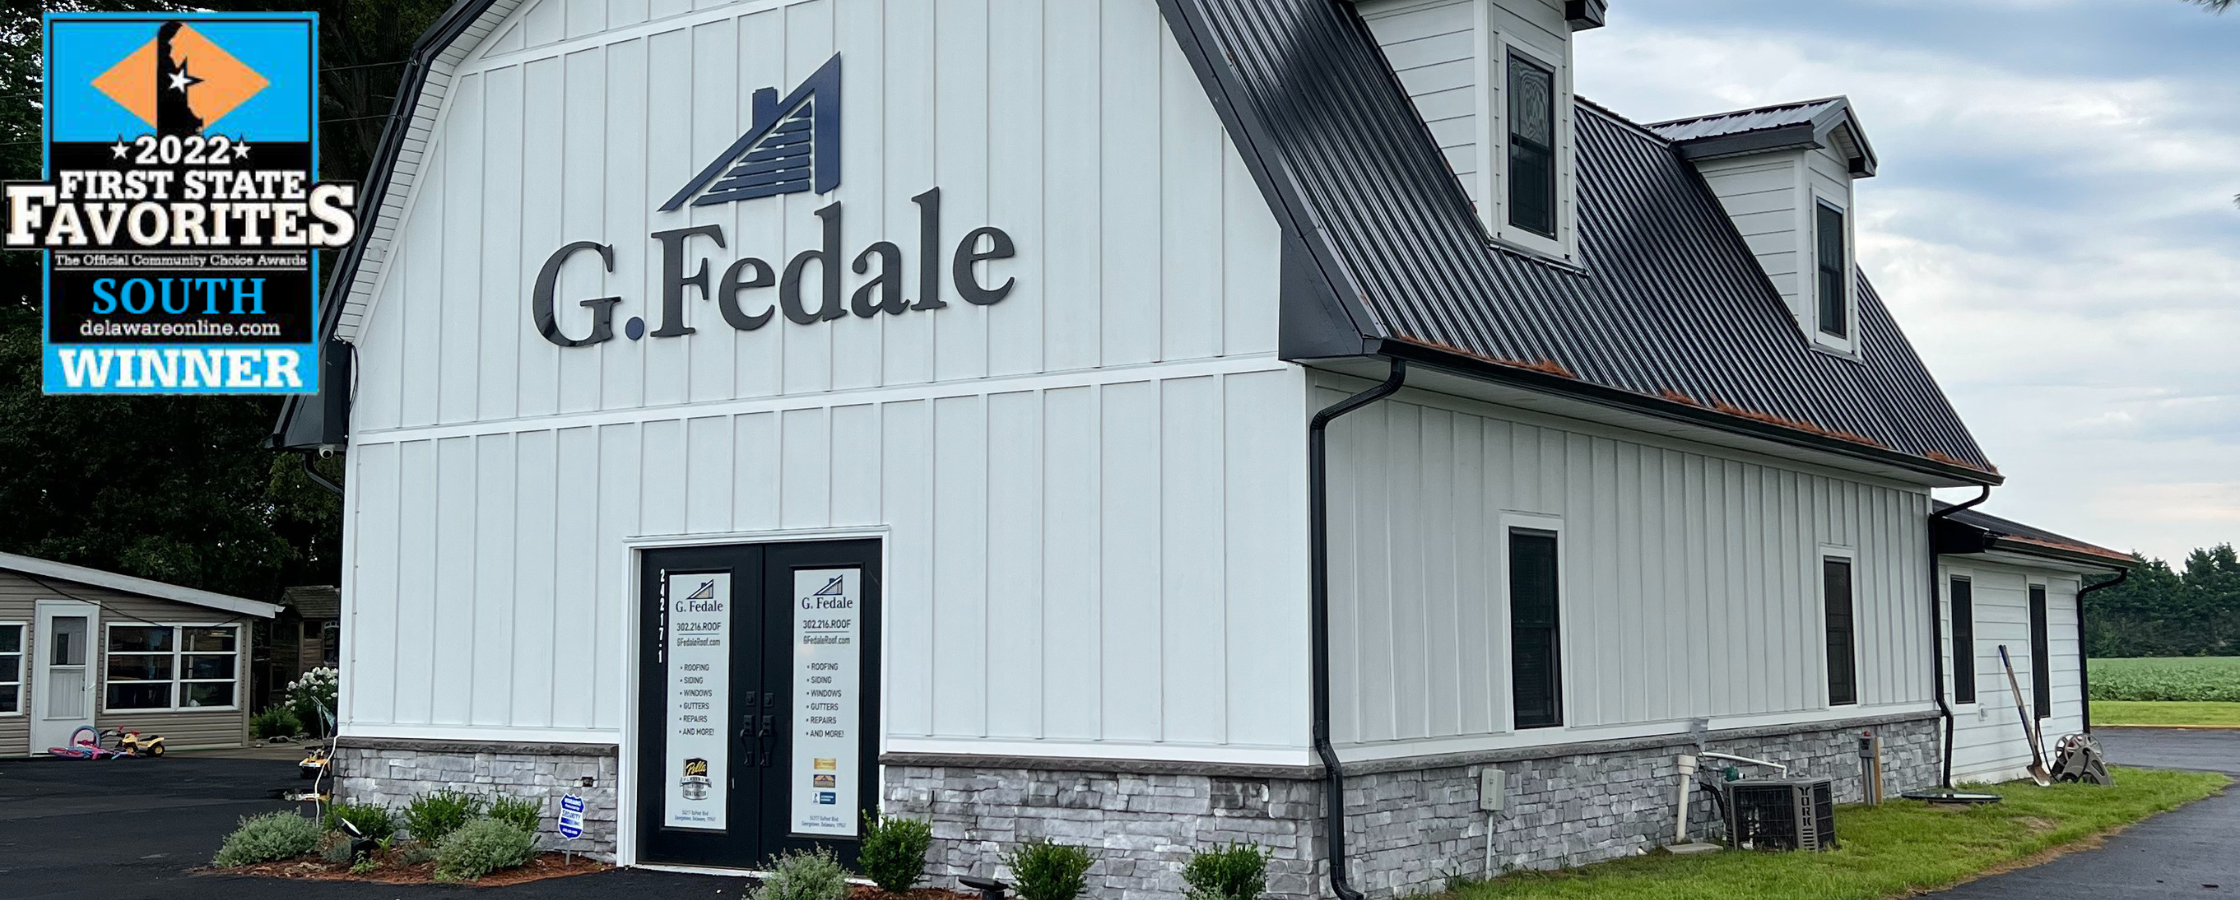 G. Fedale Roofing and Siding Wins 2022 First State Favorites South